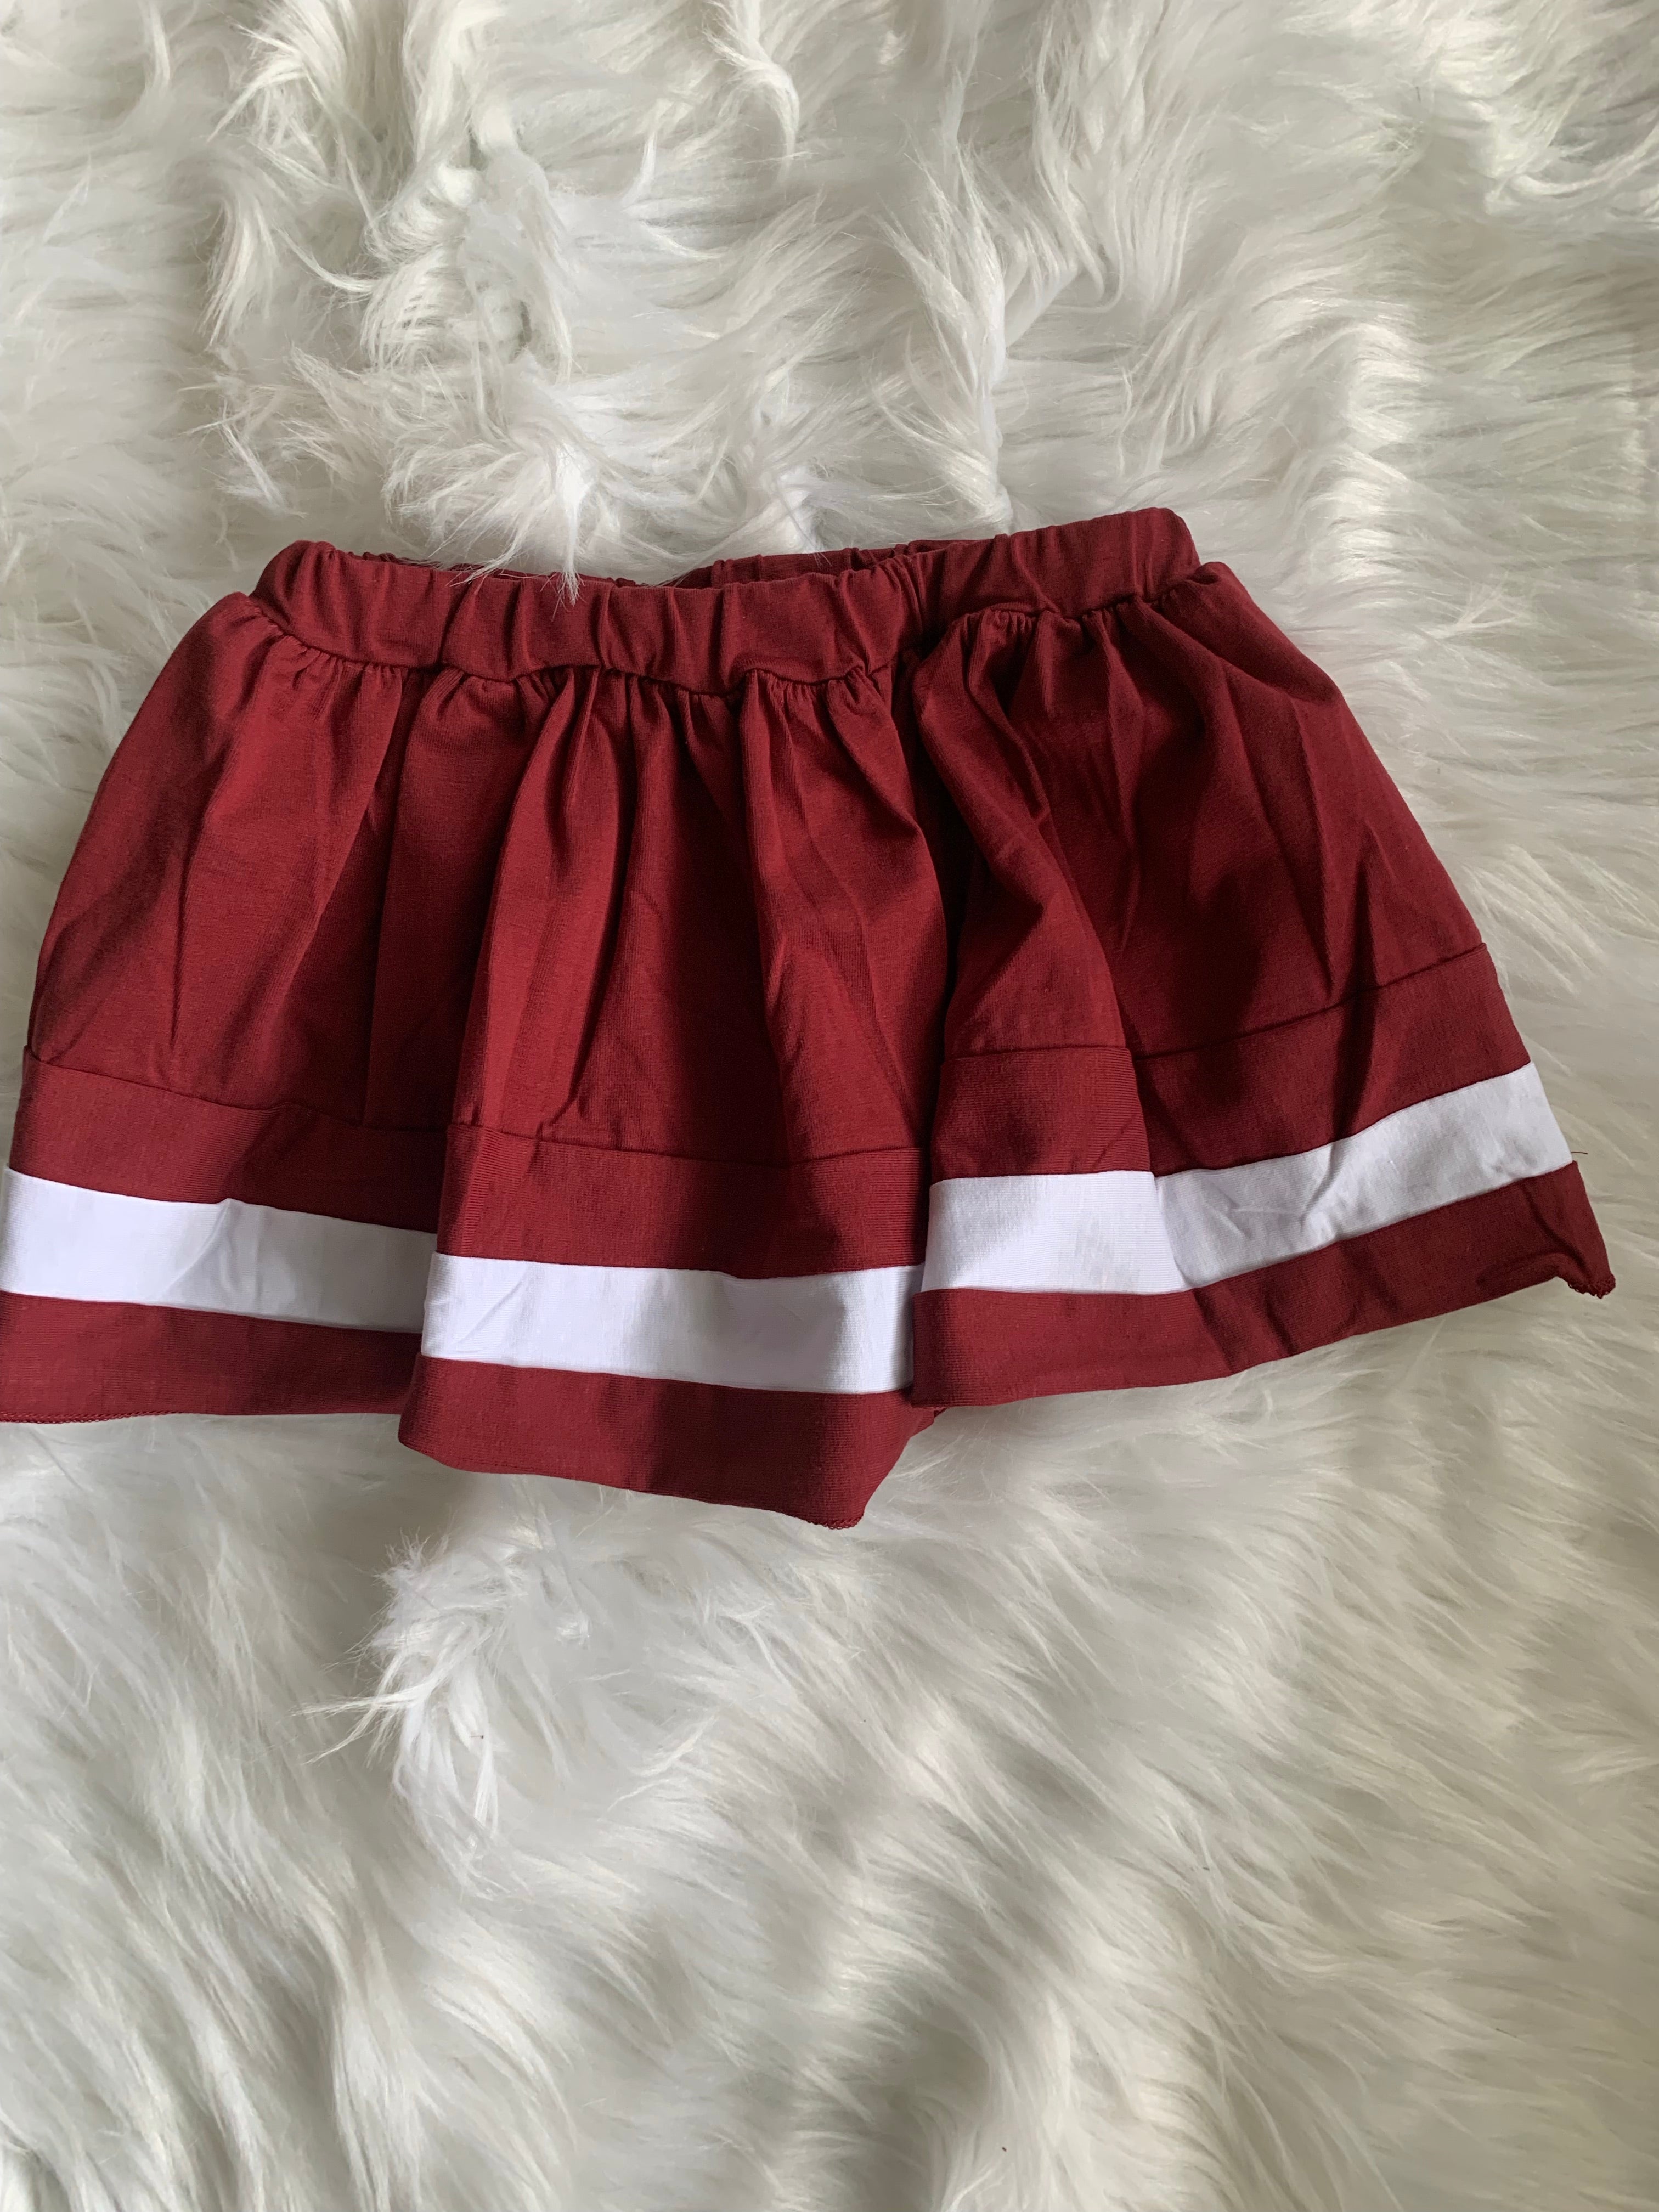 Alabama A&M Toddlers' Cheer Outfit